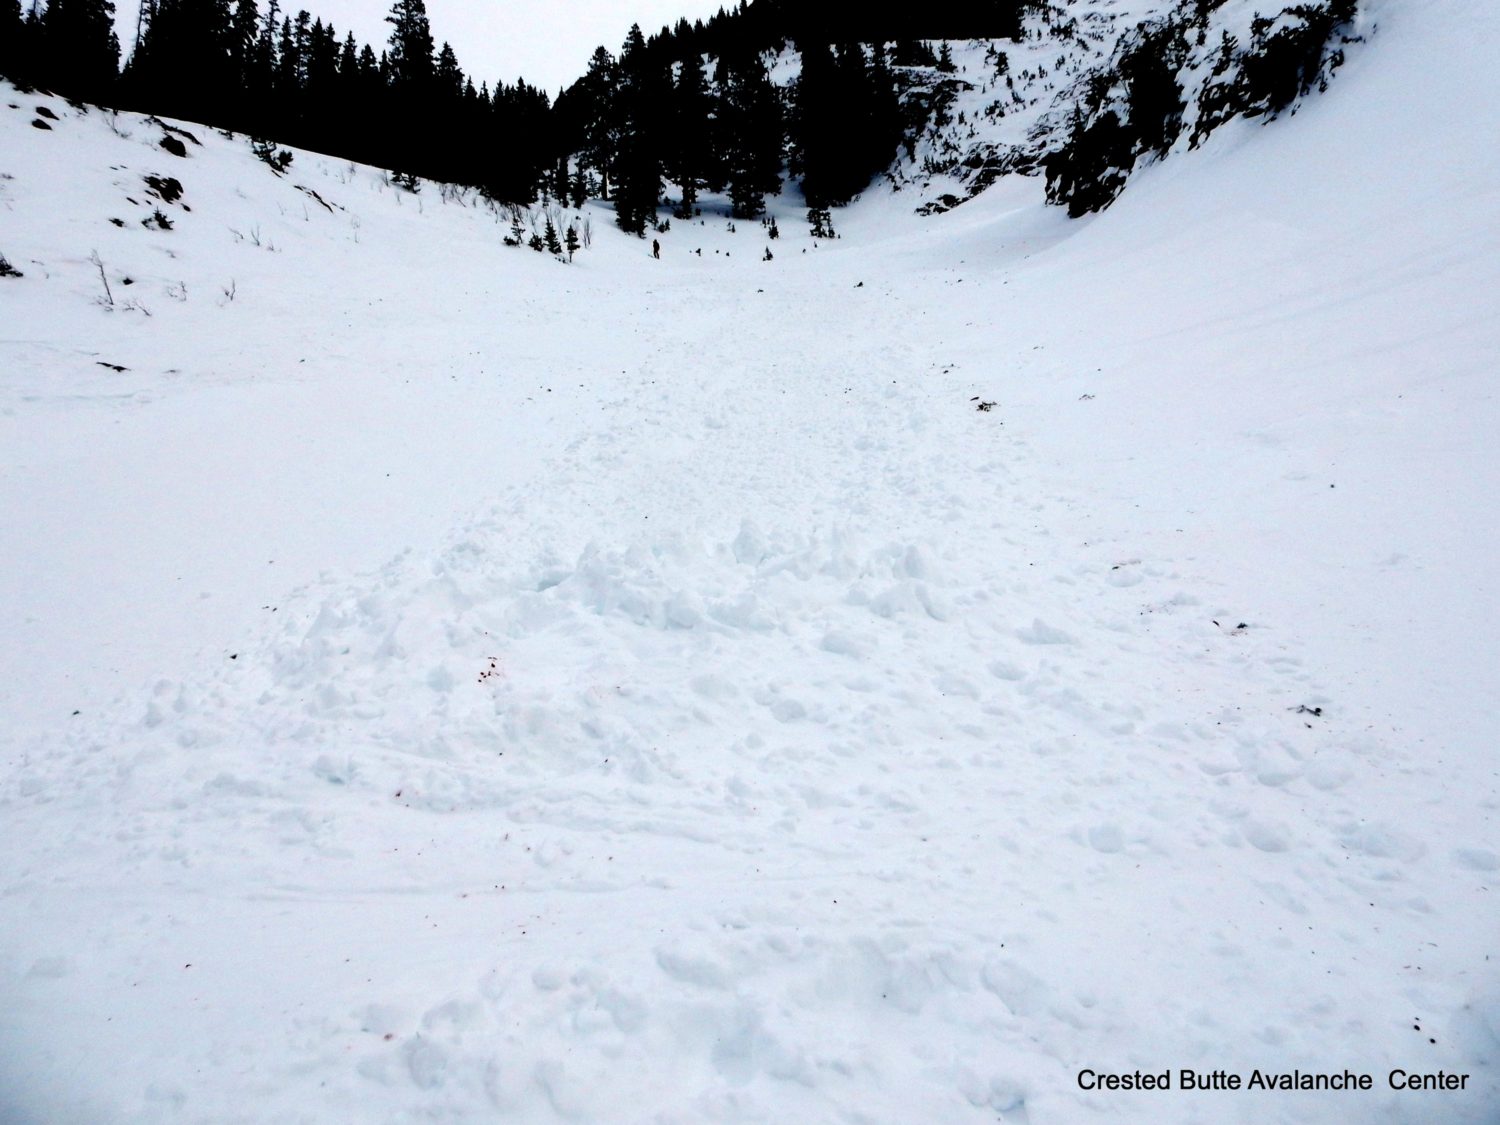 Skier was recovered on top of about 3 feet of debris, a relatively small avalanche. Image: Crested Butte Avalanche Center